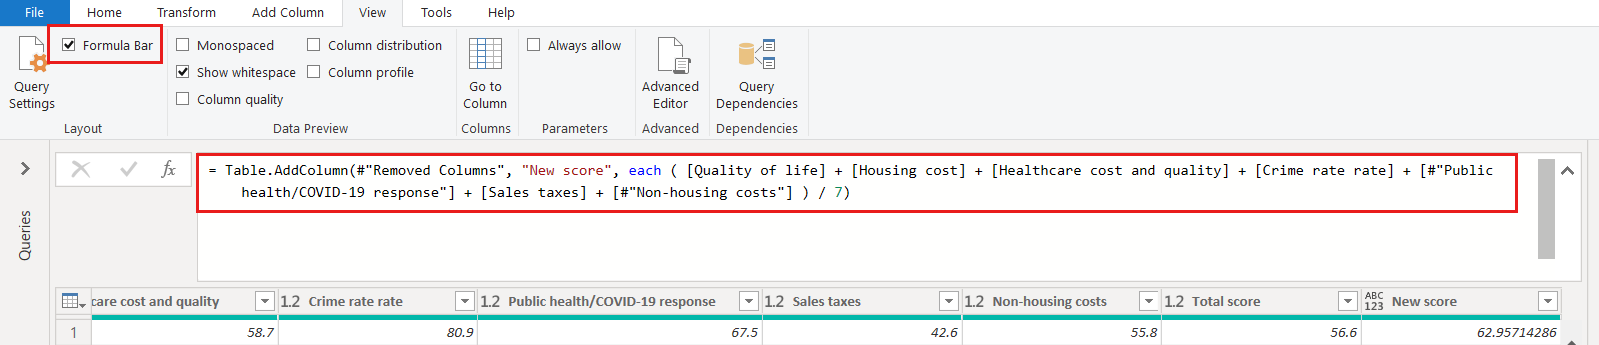 Screenshot of Power Query Editor showing the New score column and its data formula with errors fixed.